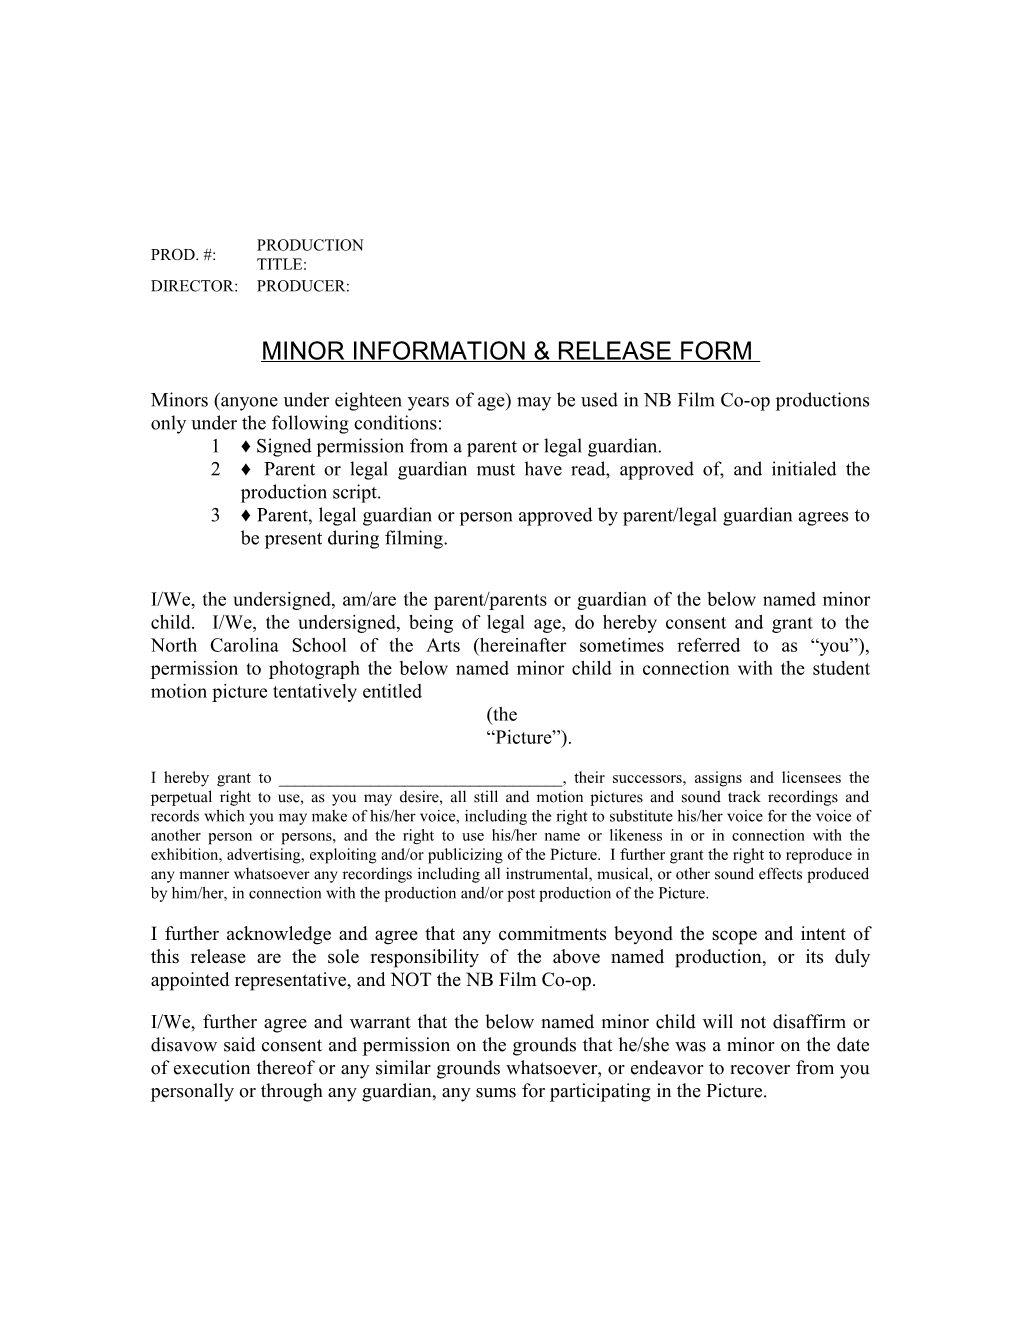 MINOR INFORMATION & RELEASE FORM Page 2